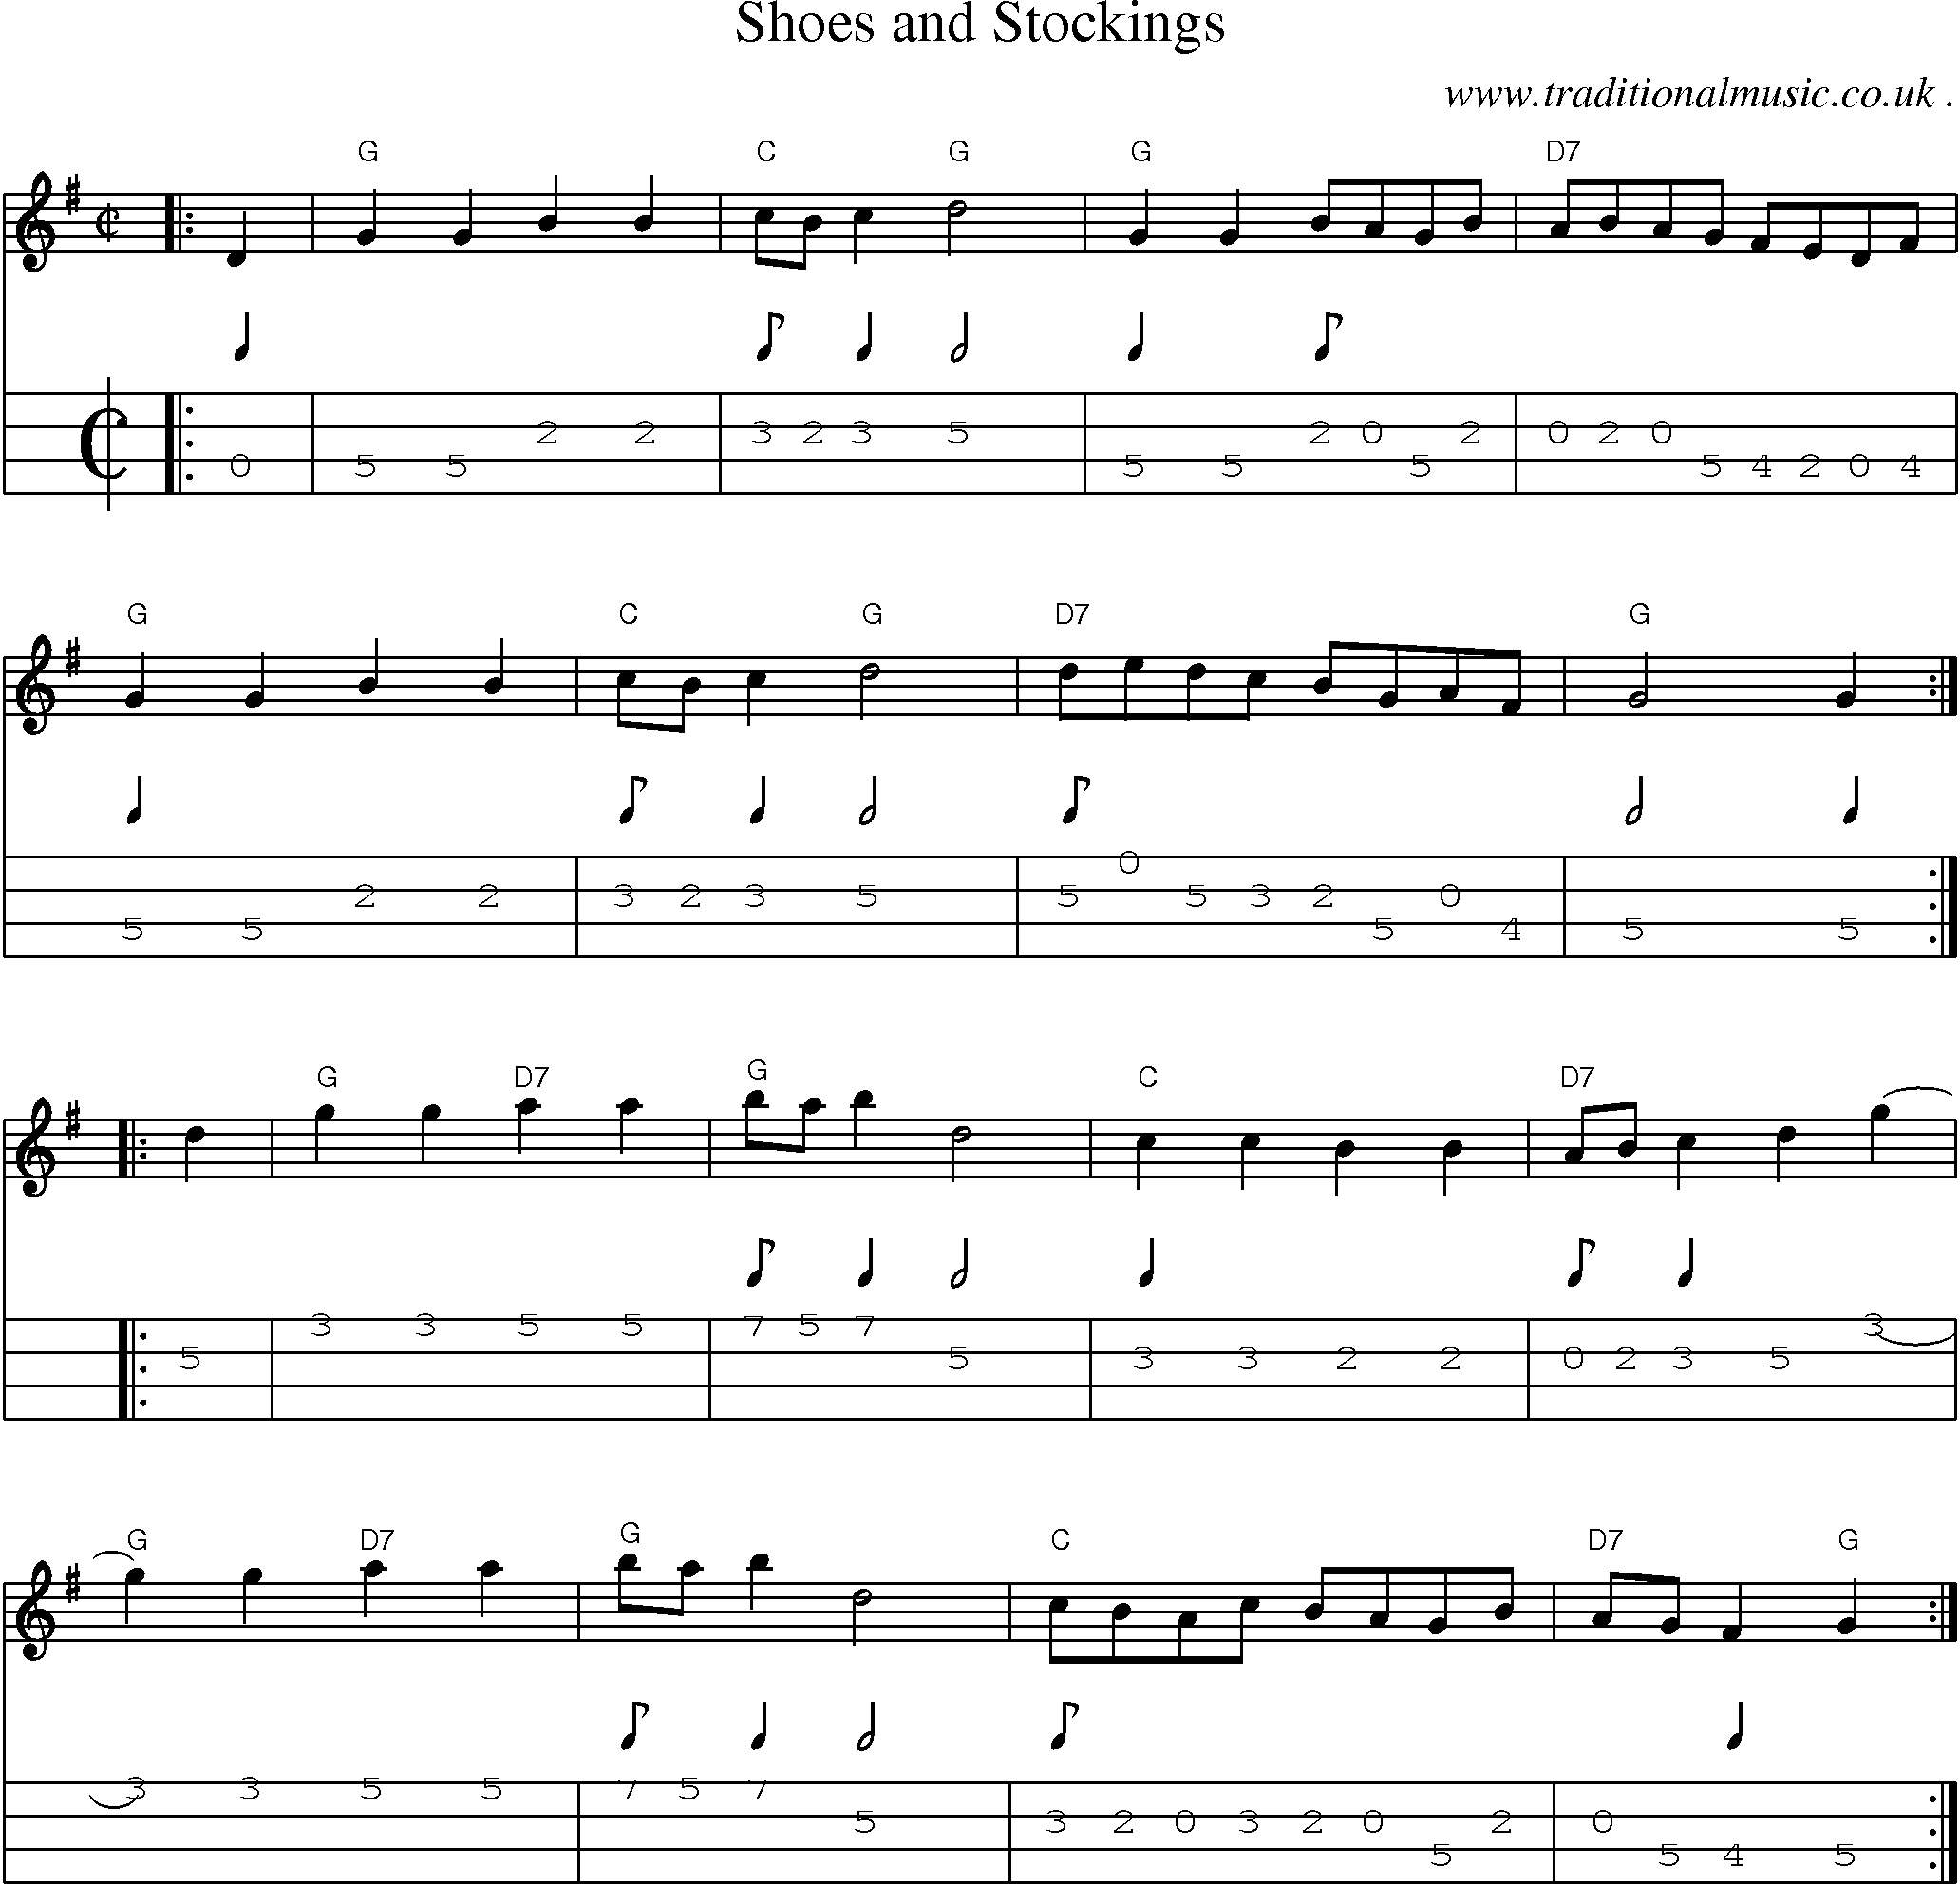 Music Score and Guitar Tabs for Shoes And Stockings